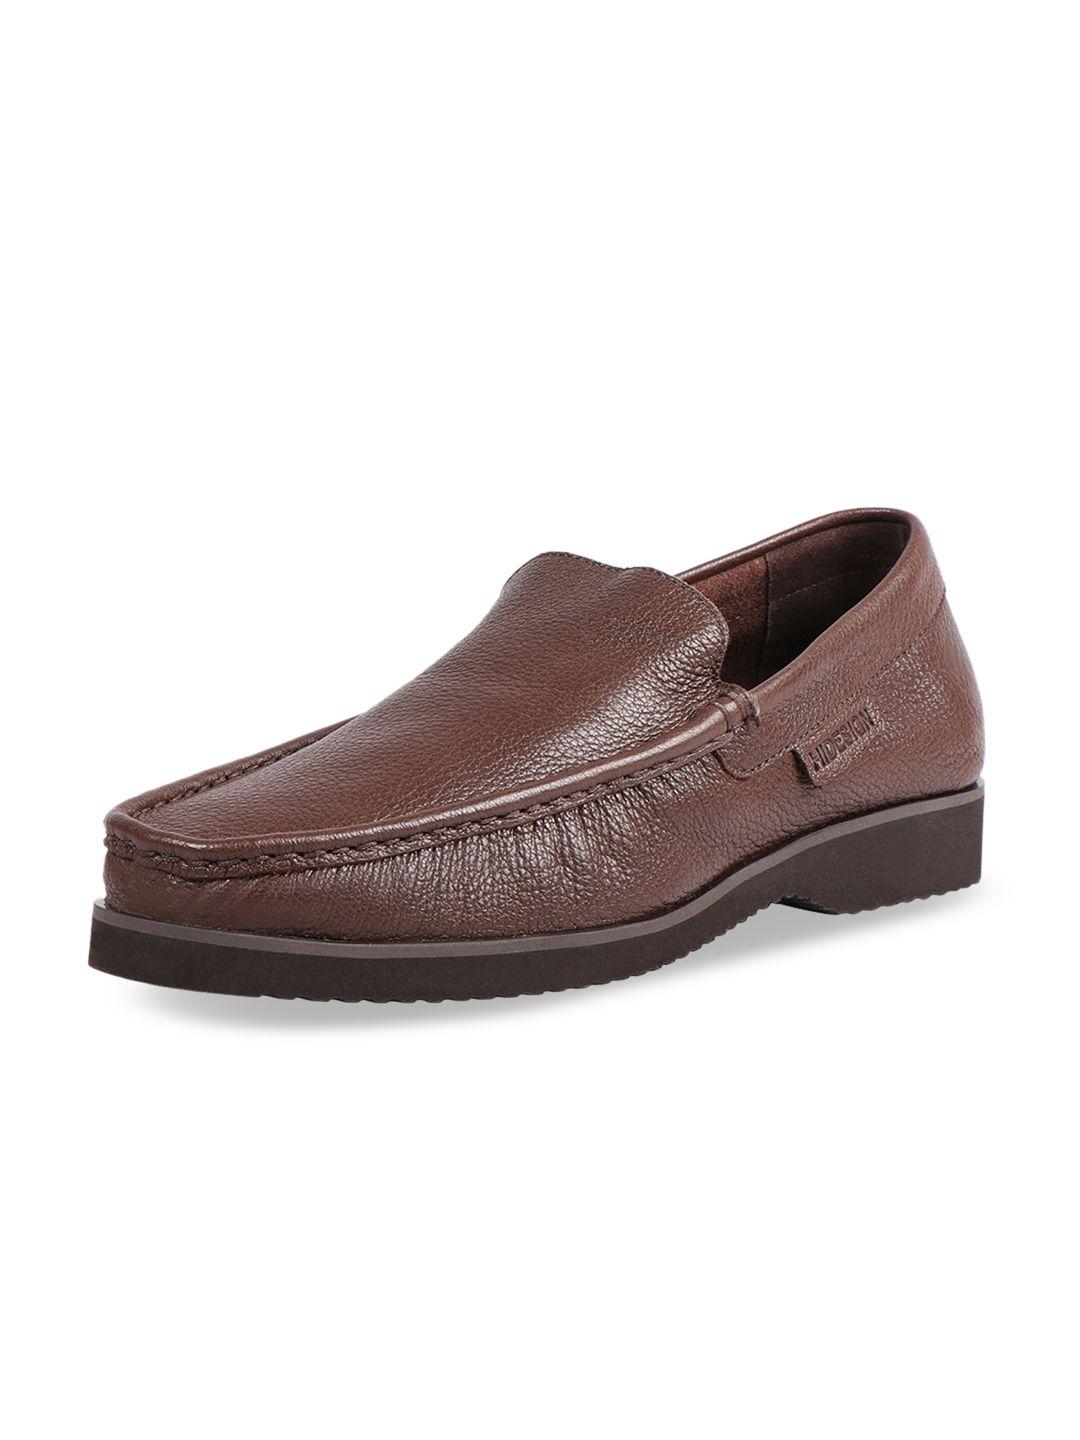 hidesign men brown leather loafers